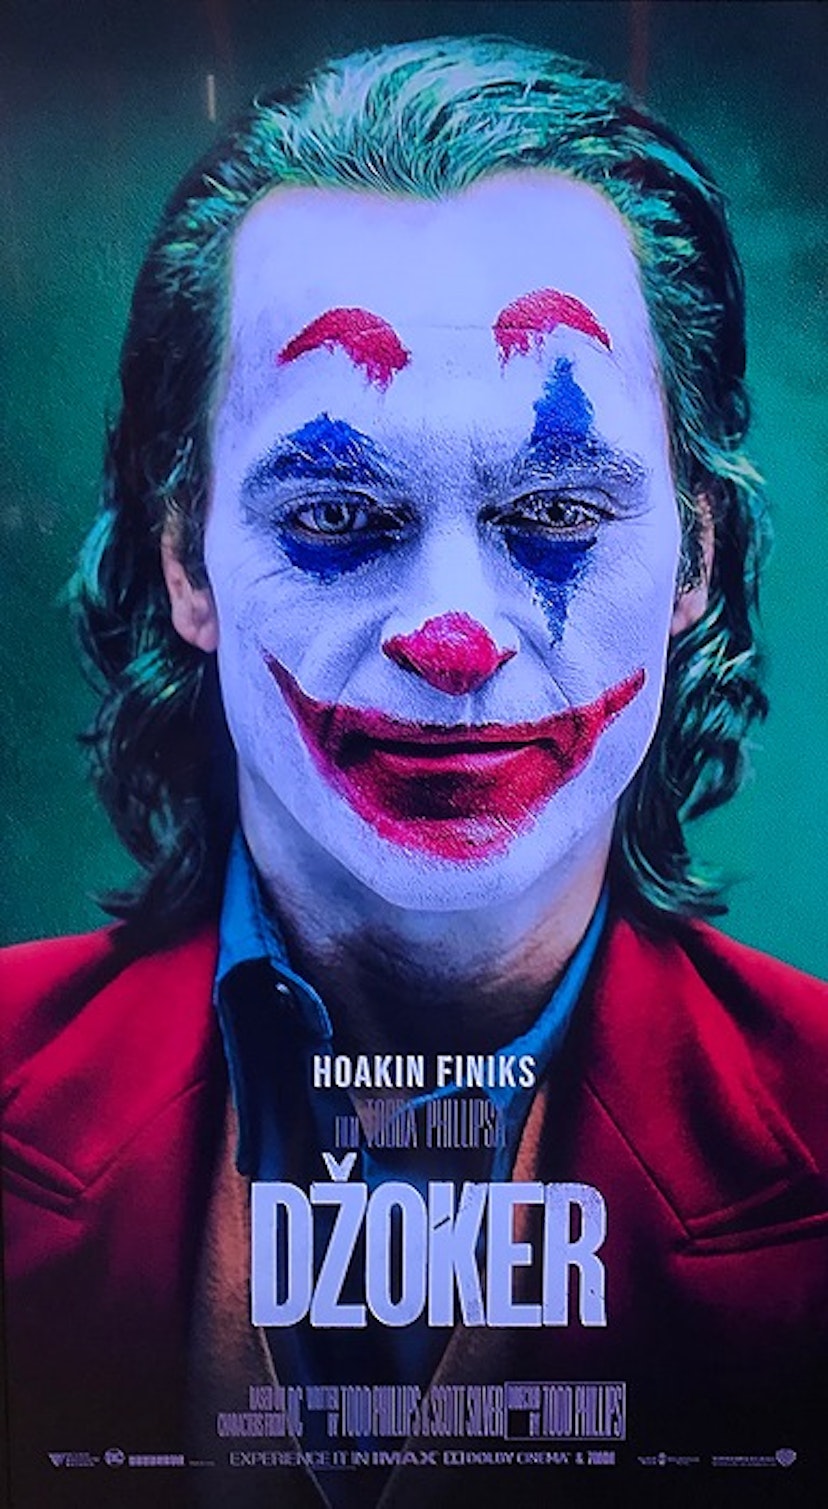 featured image - Why Do Tech Guys Need To See New
Joker Movie?